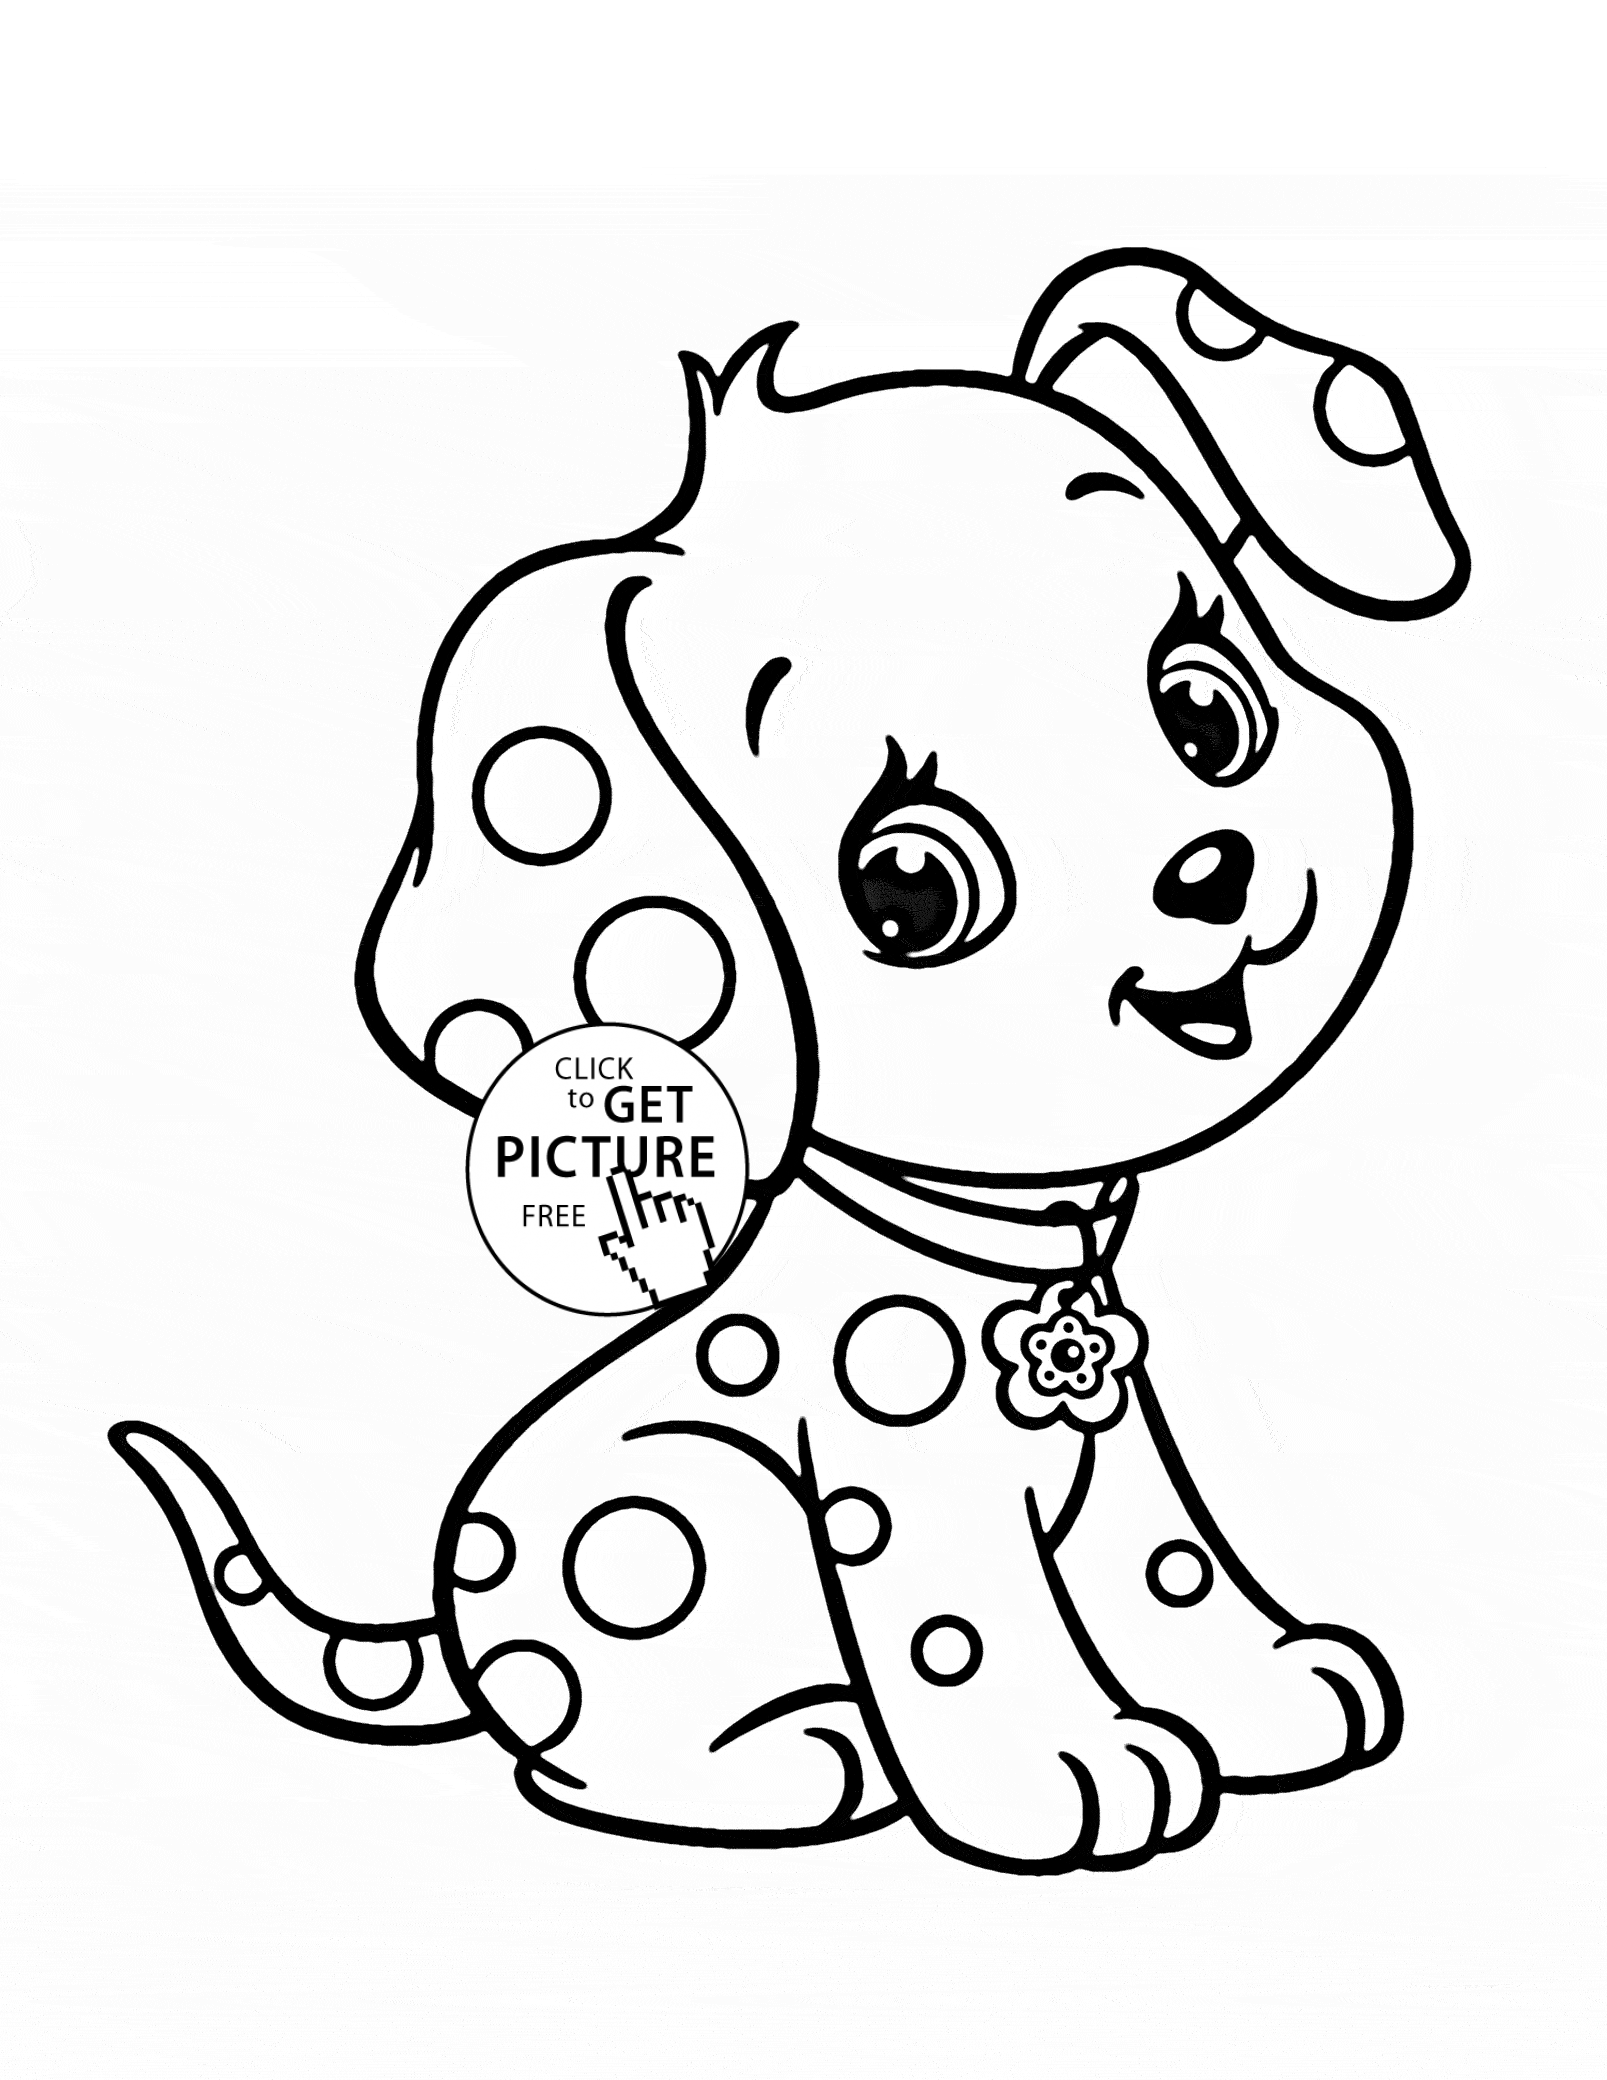 Cartoon Puppy coloring page for kids, animal coloring pages ...